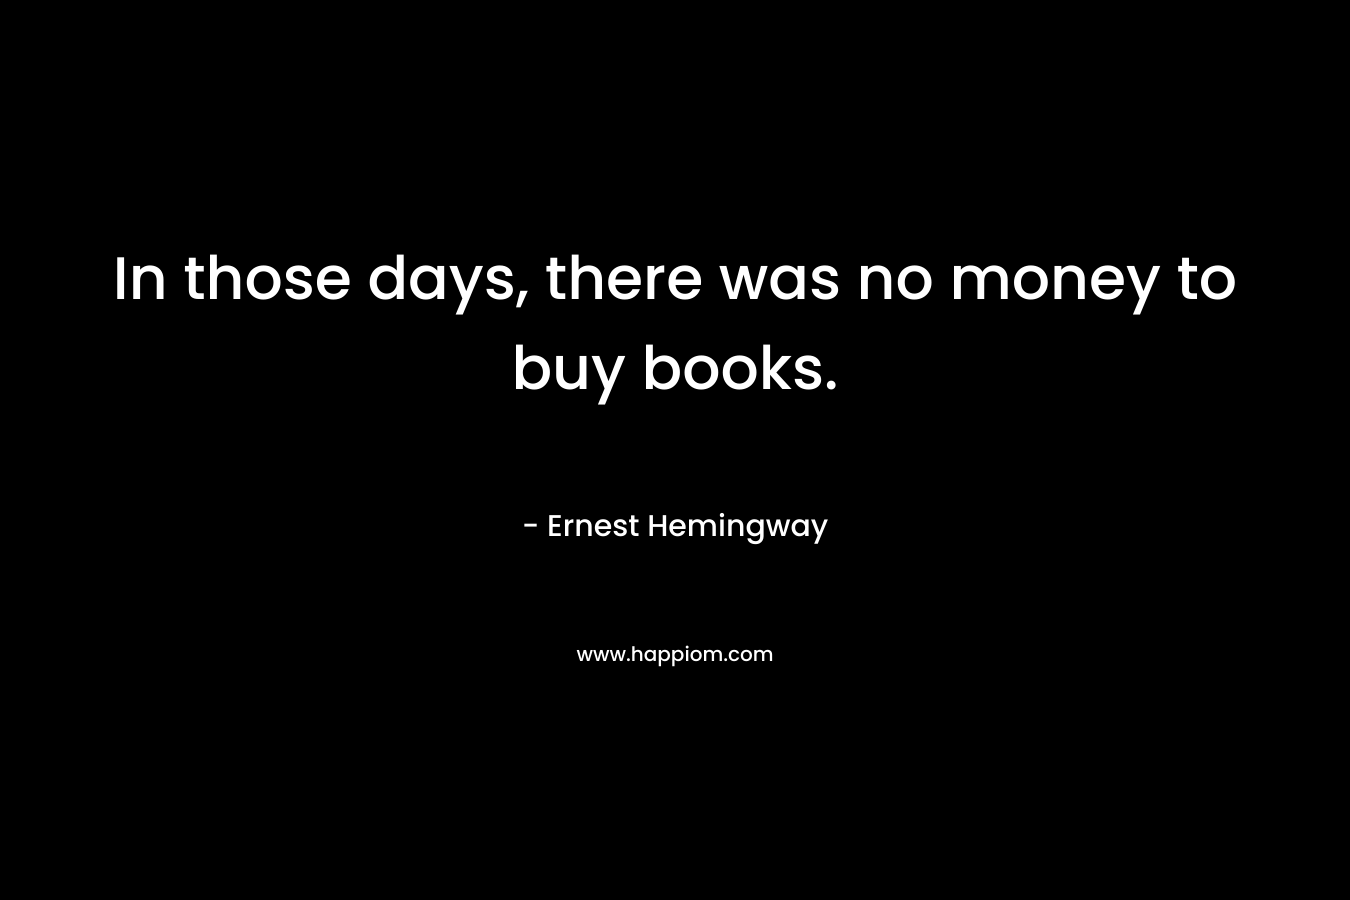 In those days, there was no money to buy books.